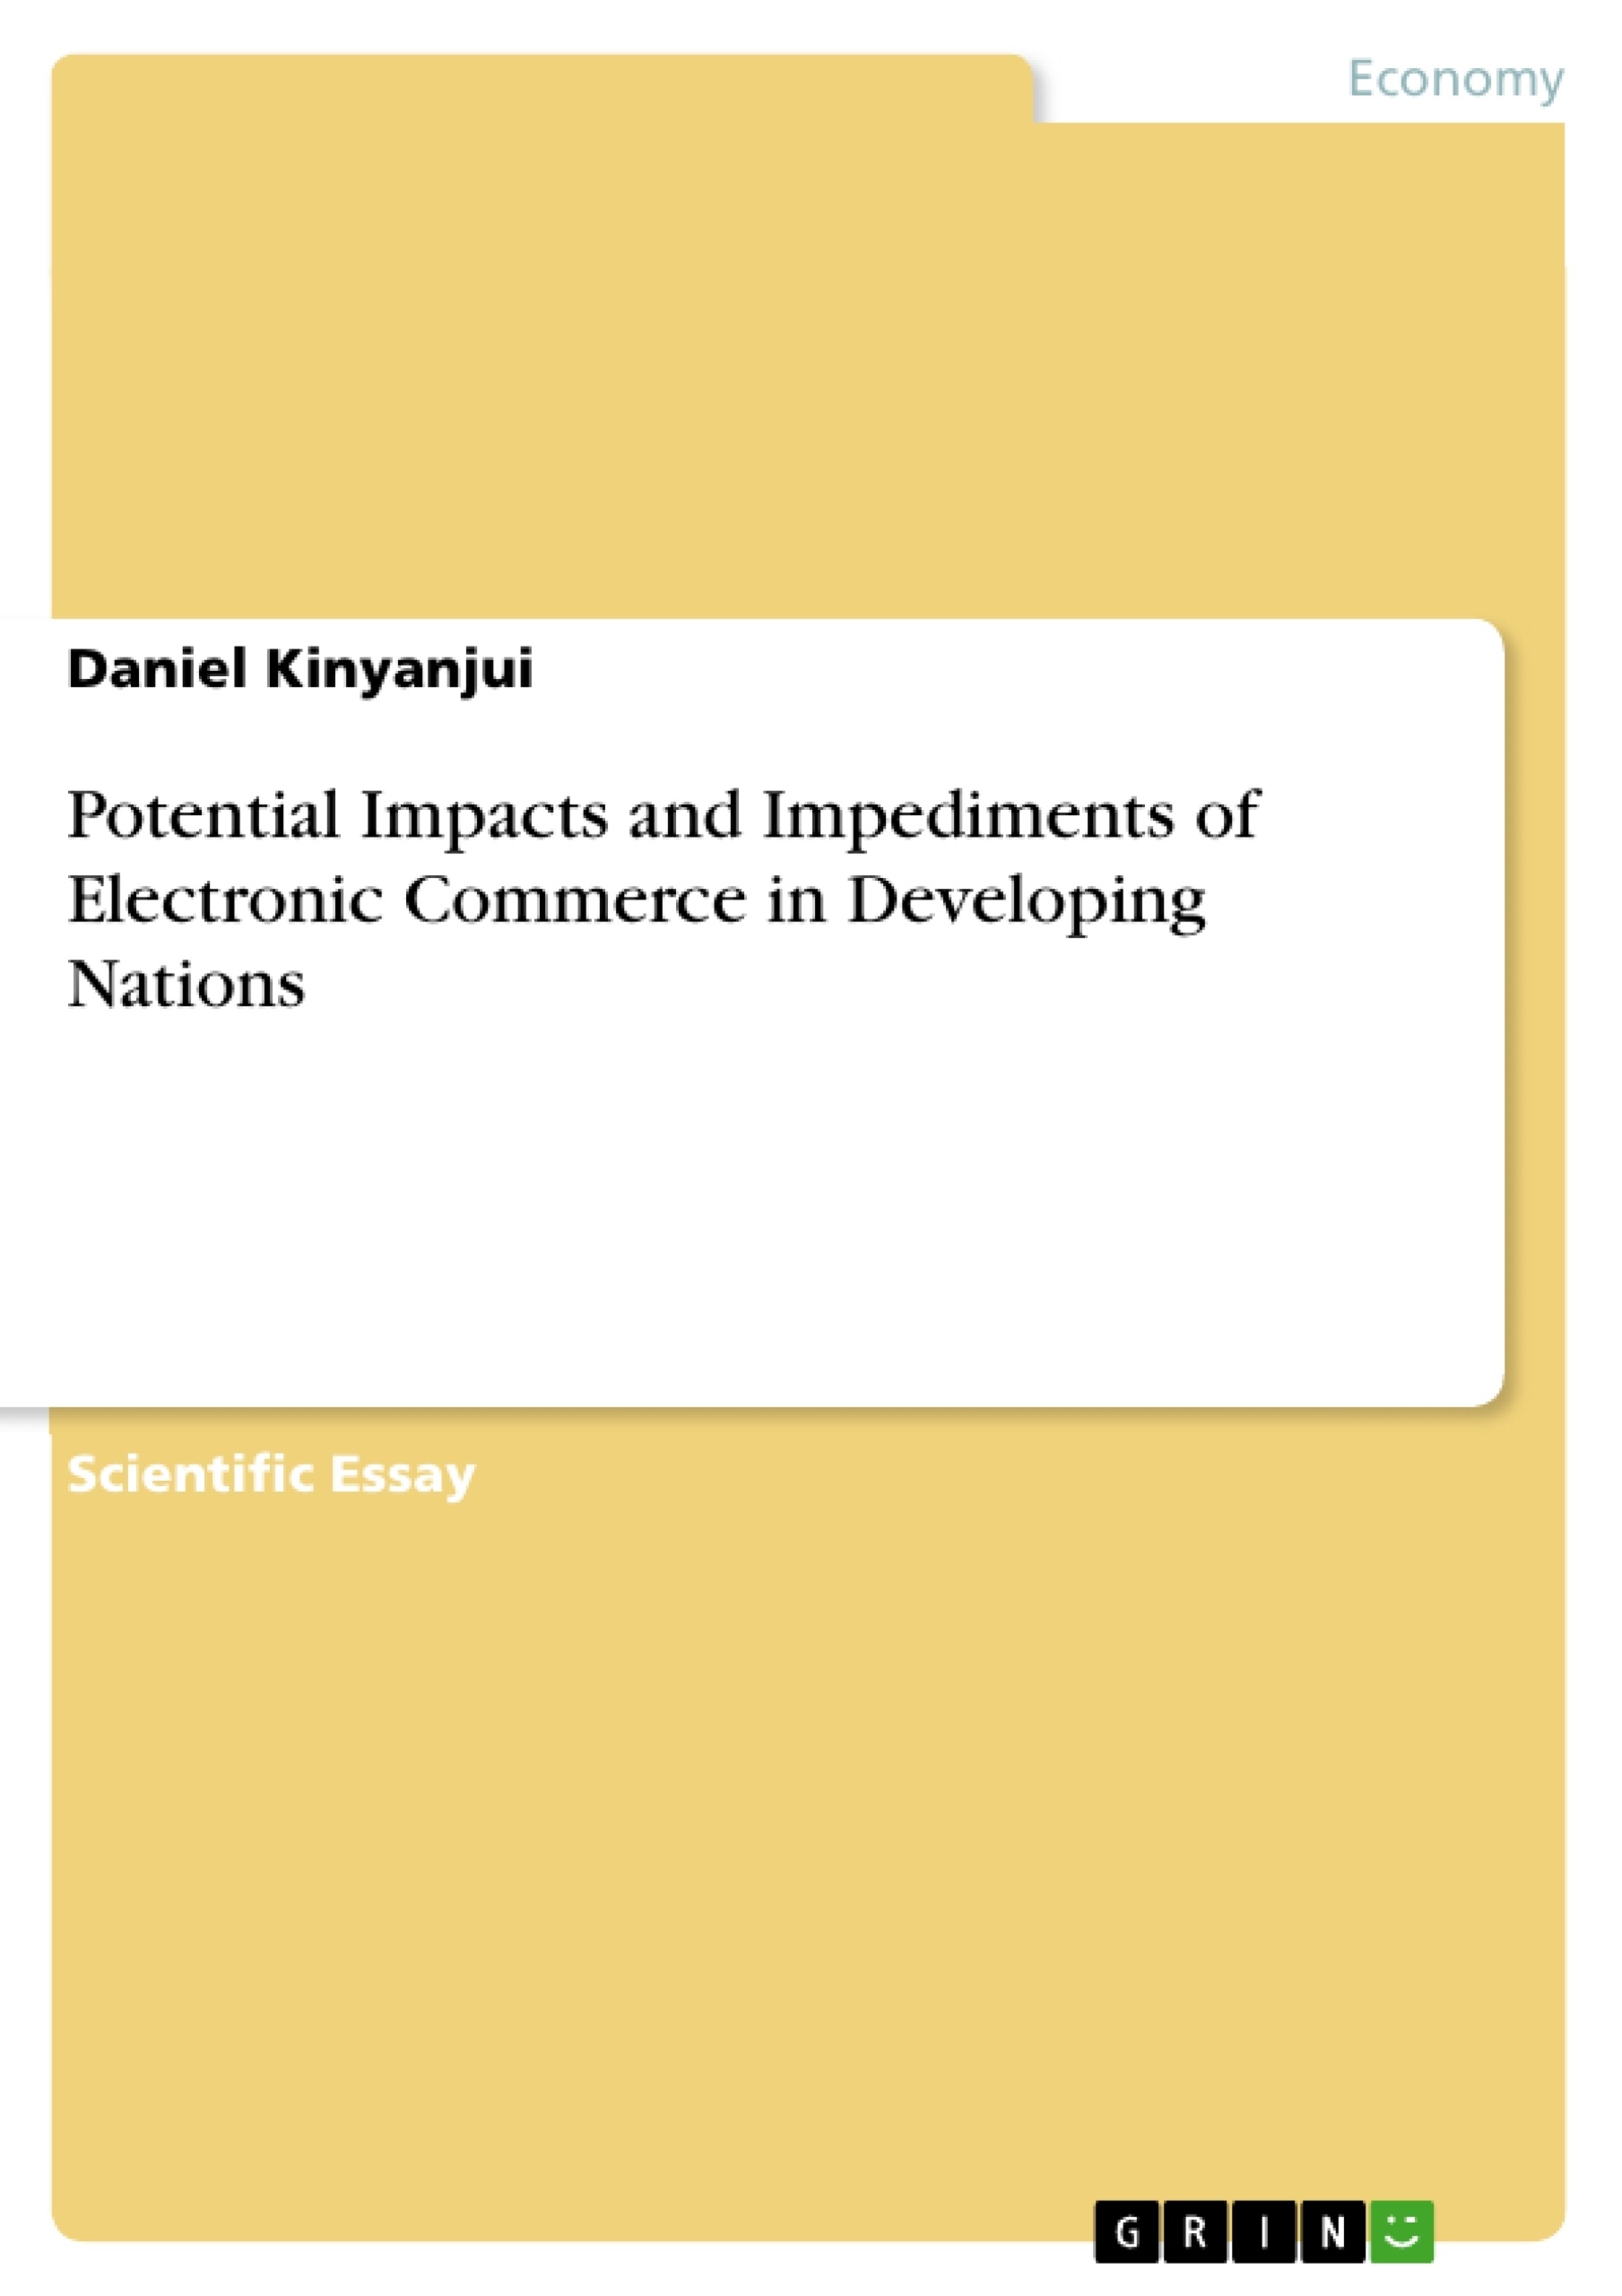 Titel: Potential Impacts and Impediments of Electronic Commerce in Developing Nations